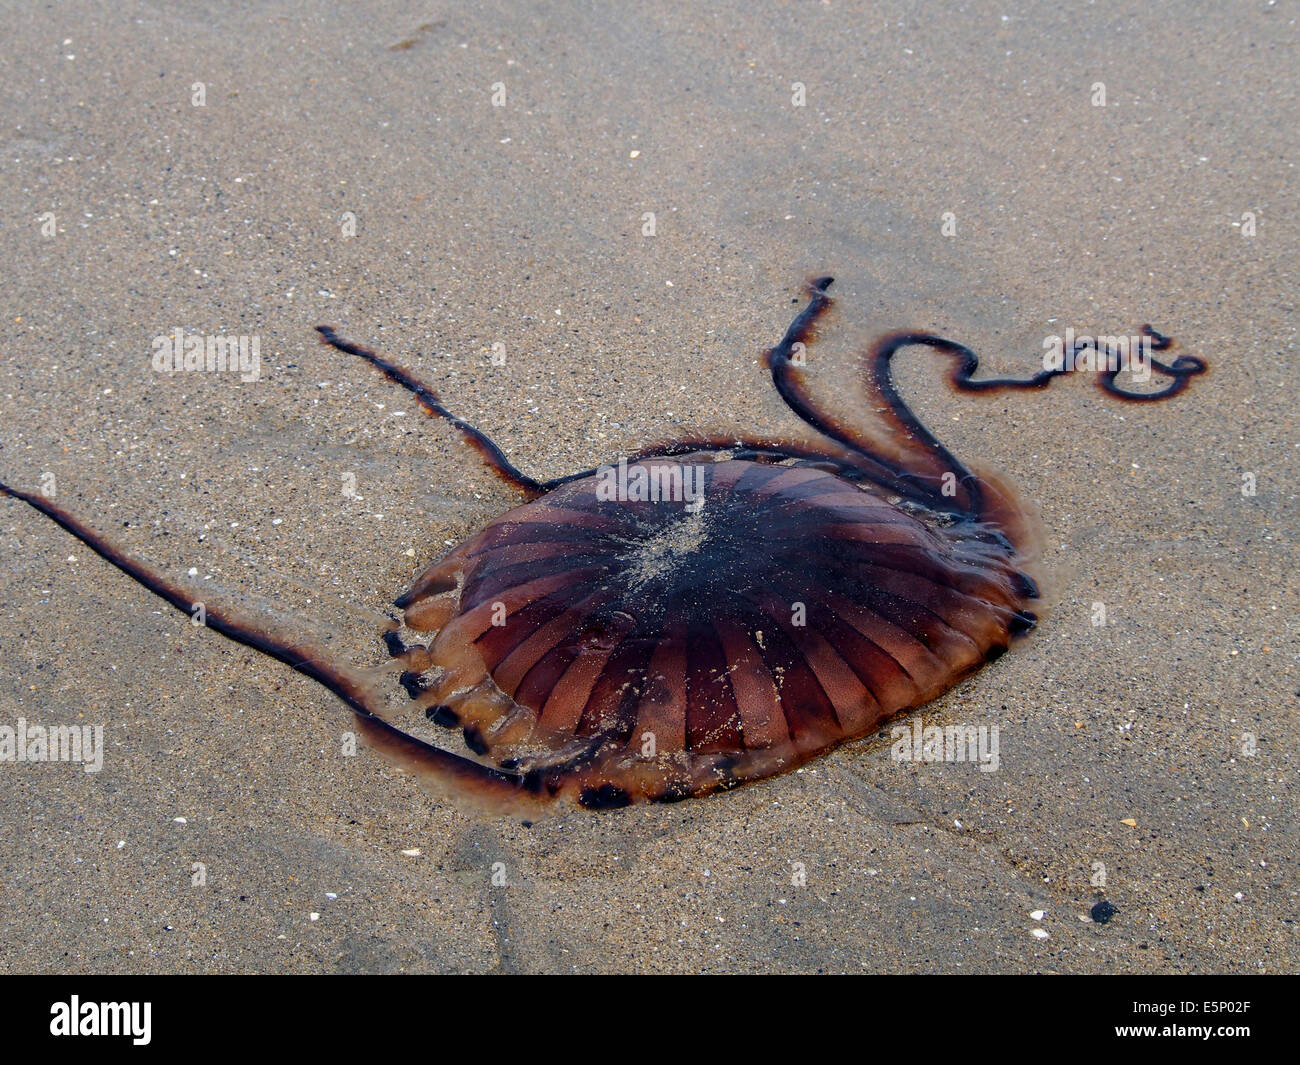 Chrysaora hysoscella, also known as the compass jellyfish washed up on the beach at Mullaghmore, Ireland Stock Photo